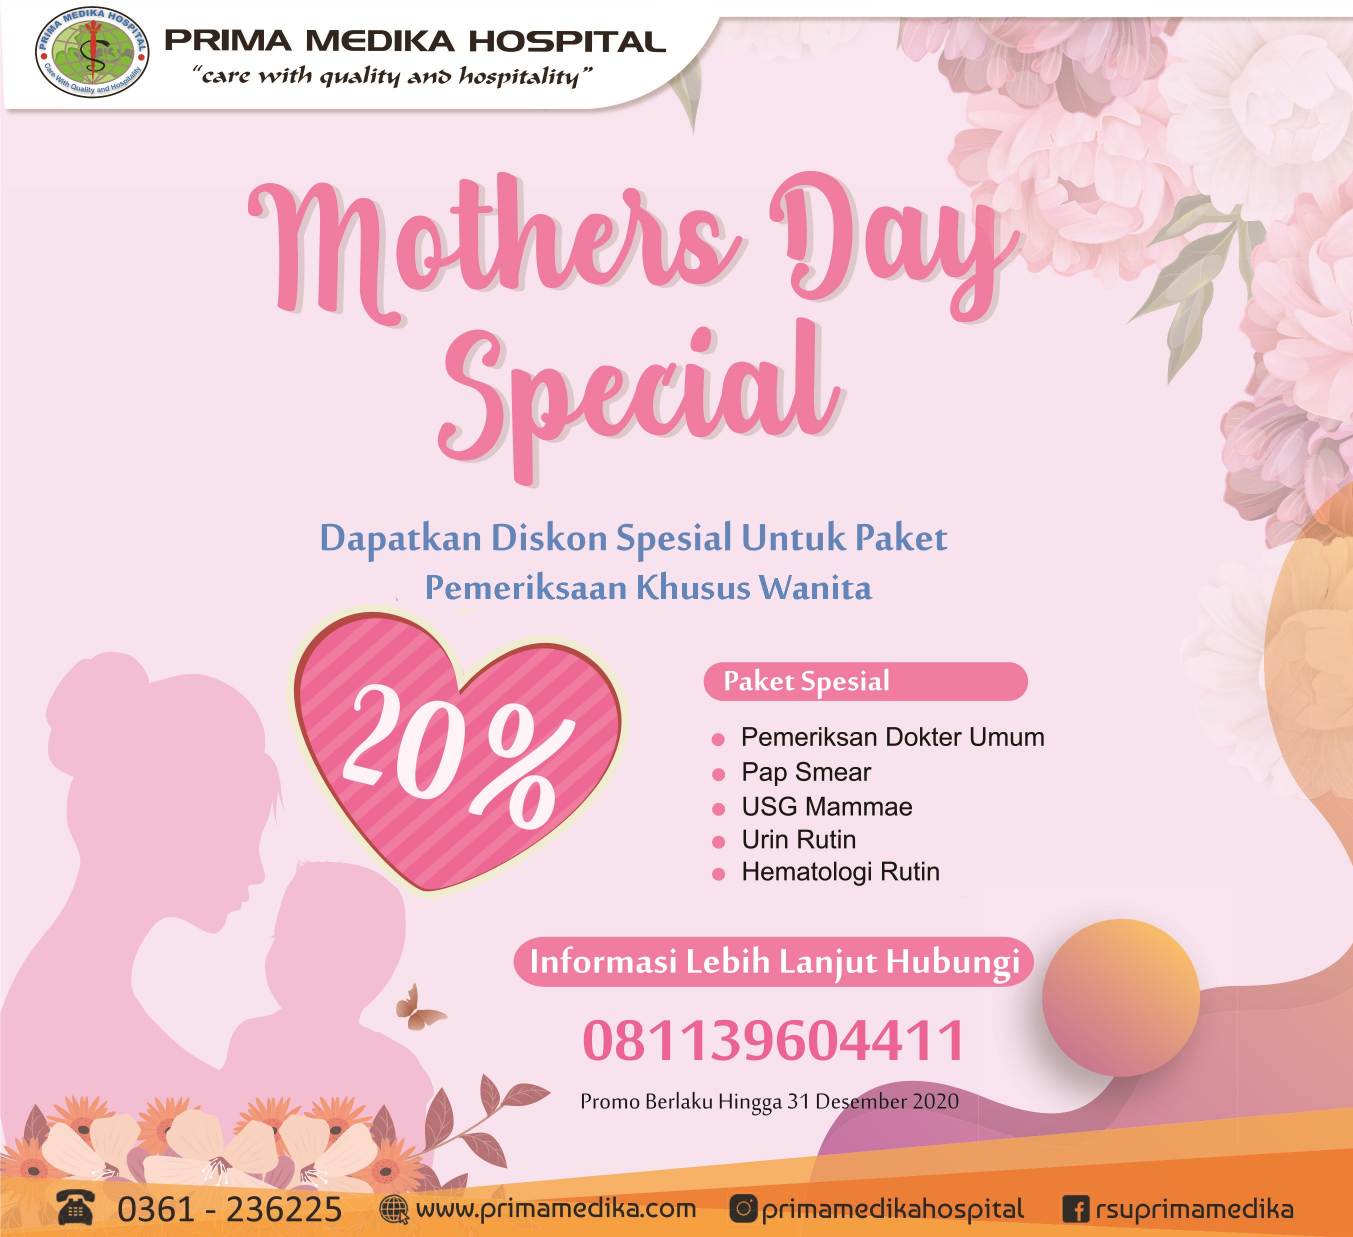 Spesial Promo ! "Mothers Day Spesial"